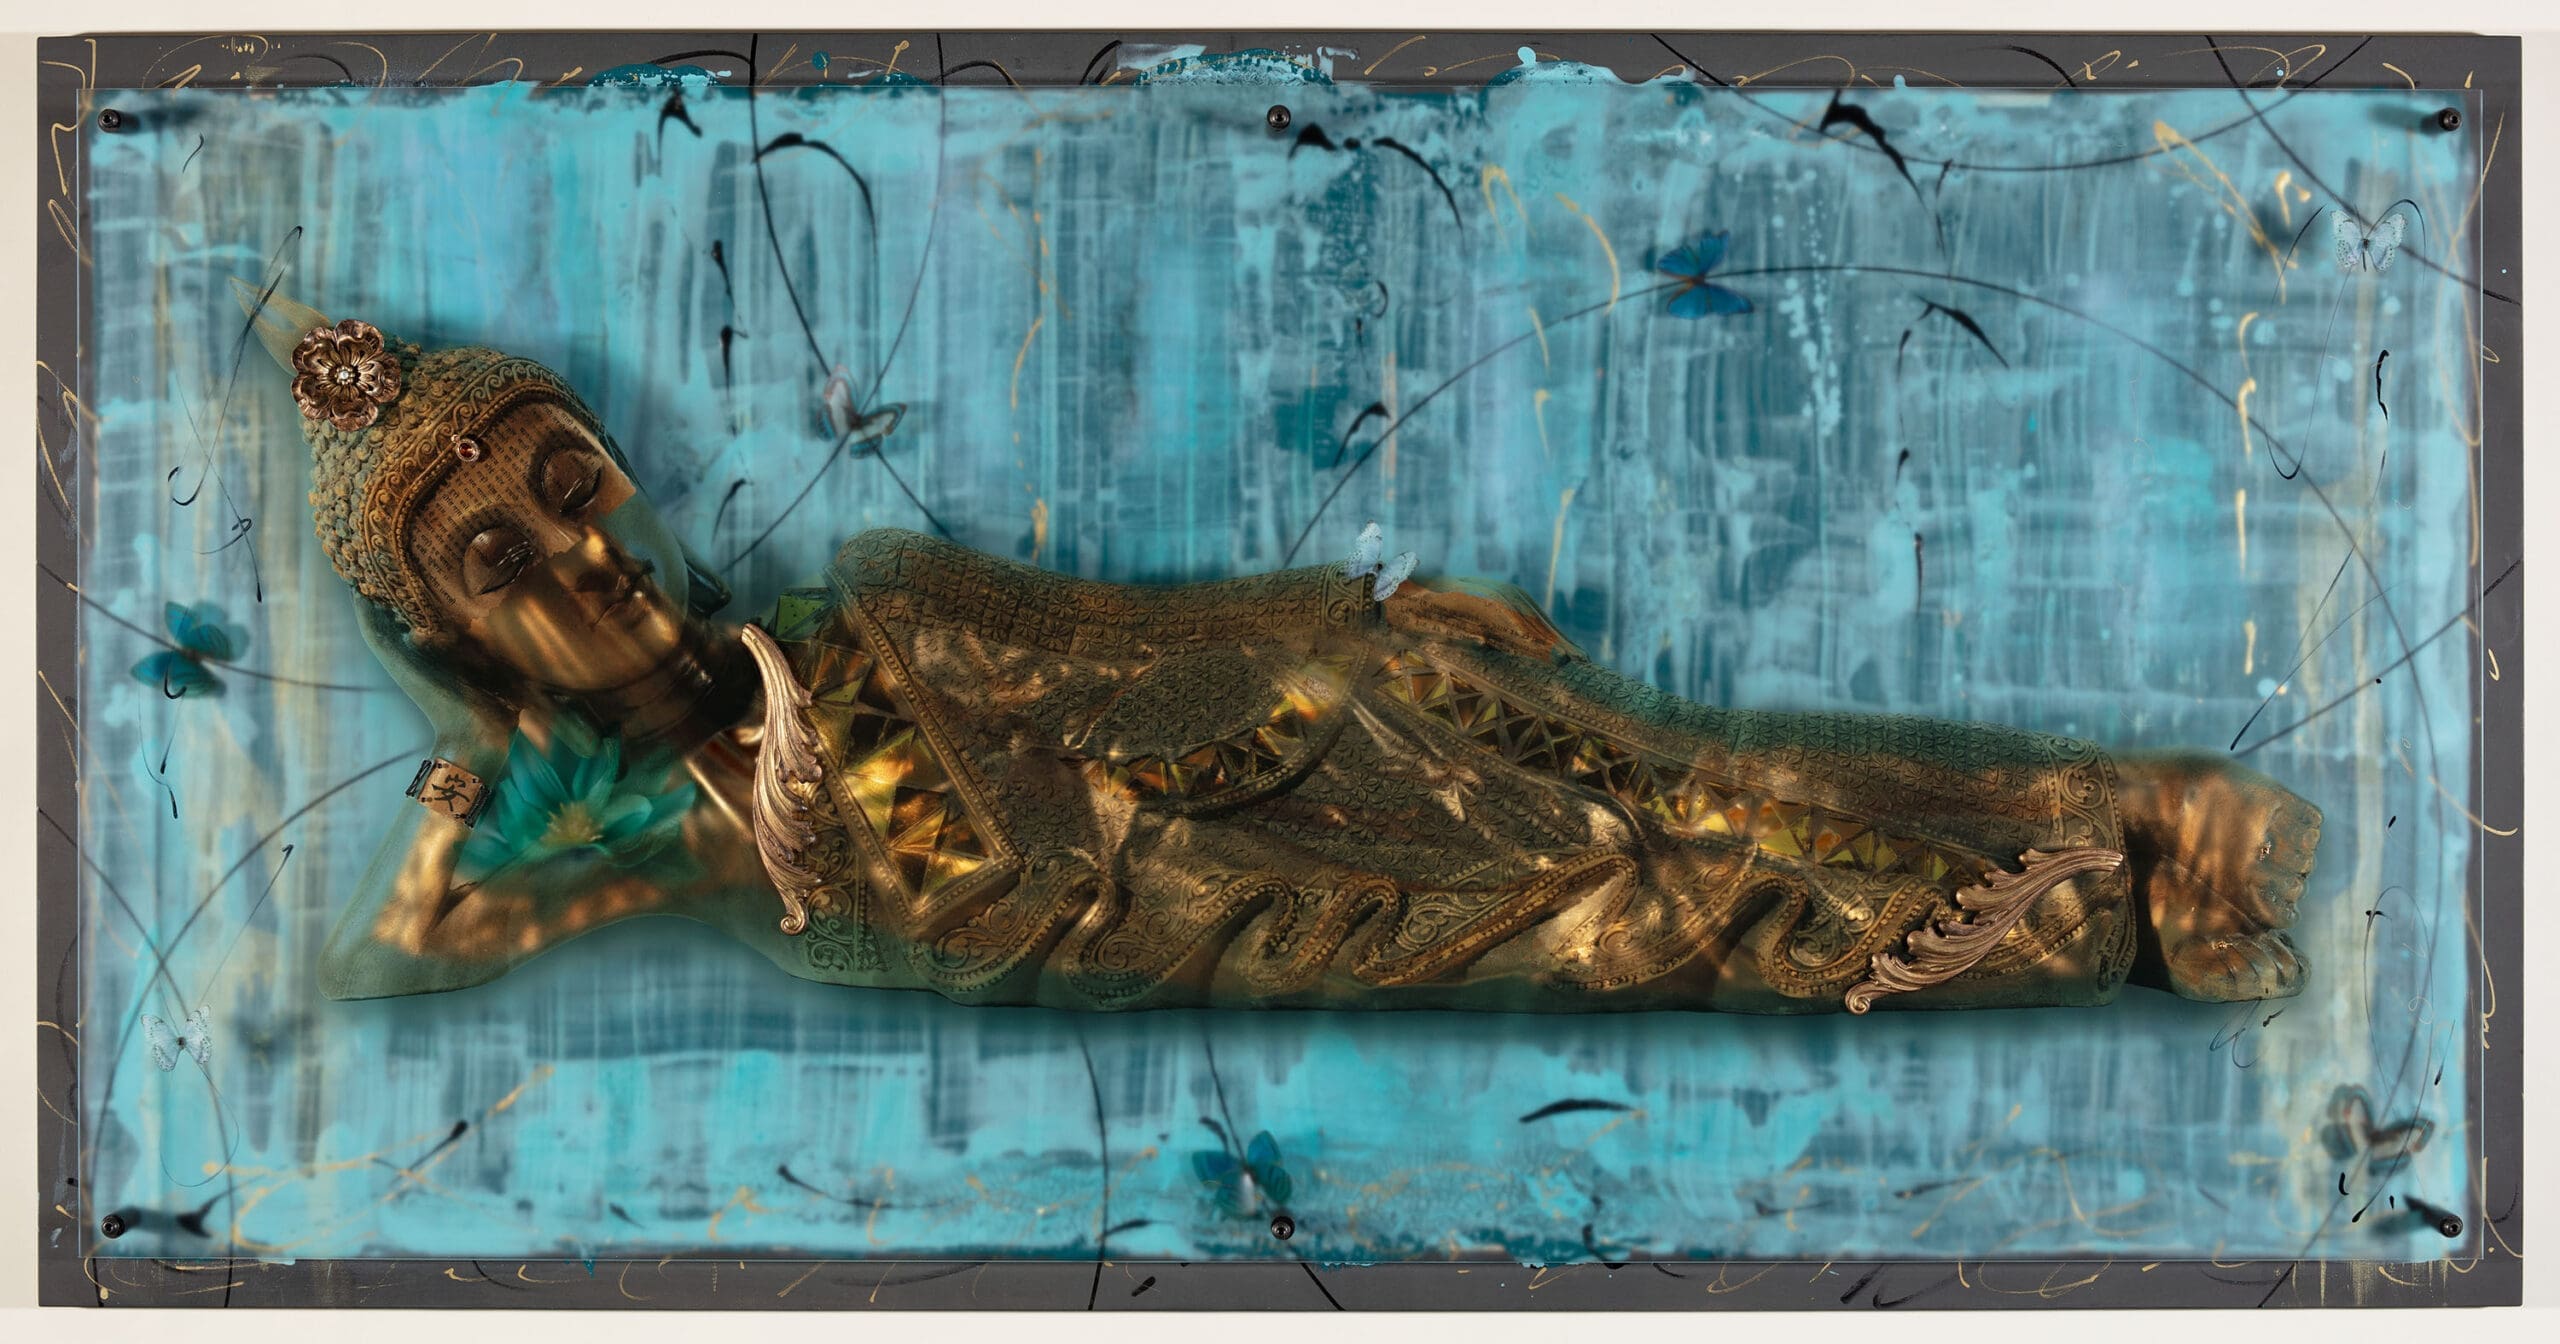 Tranquility's Muse 31x61, Layered Mixed Media